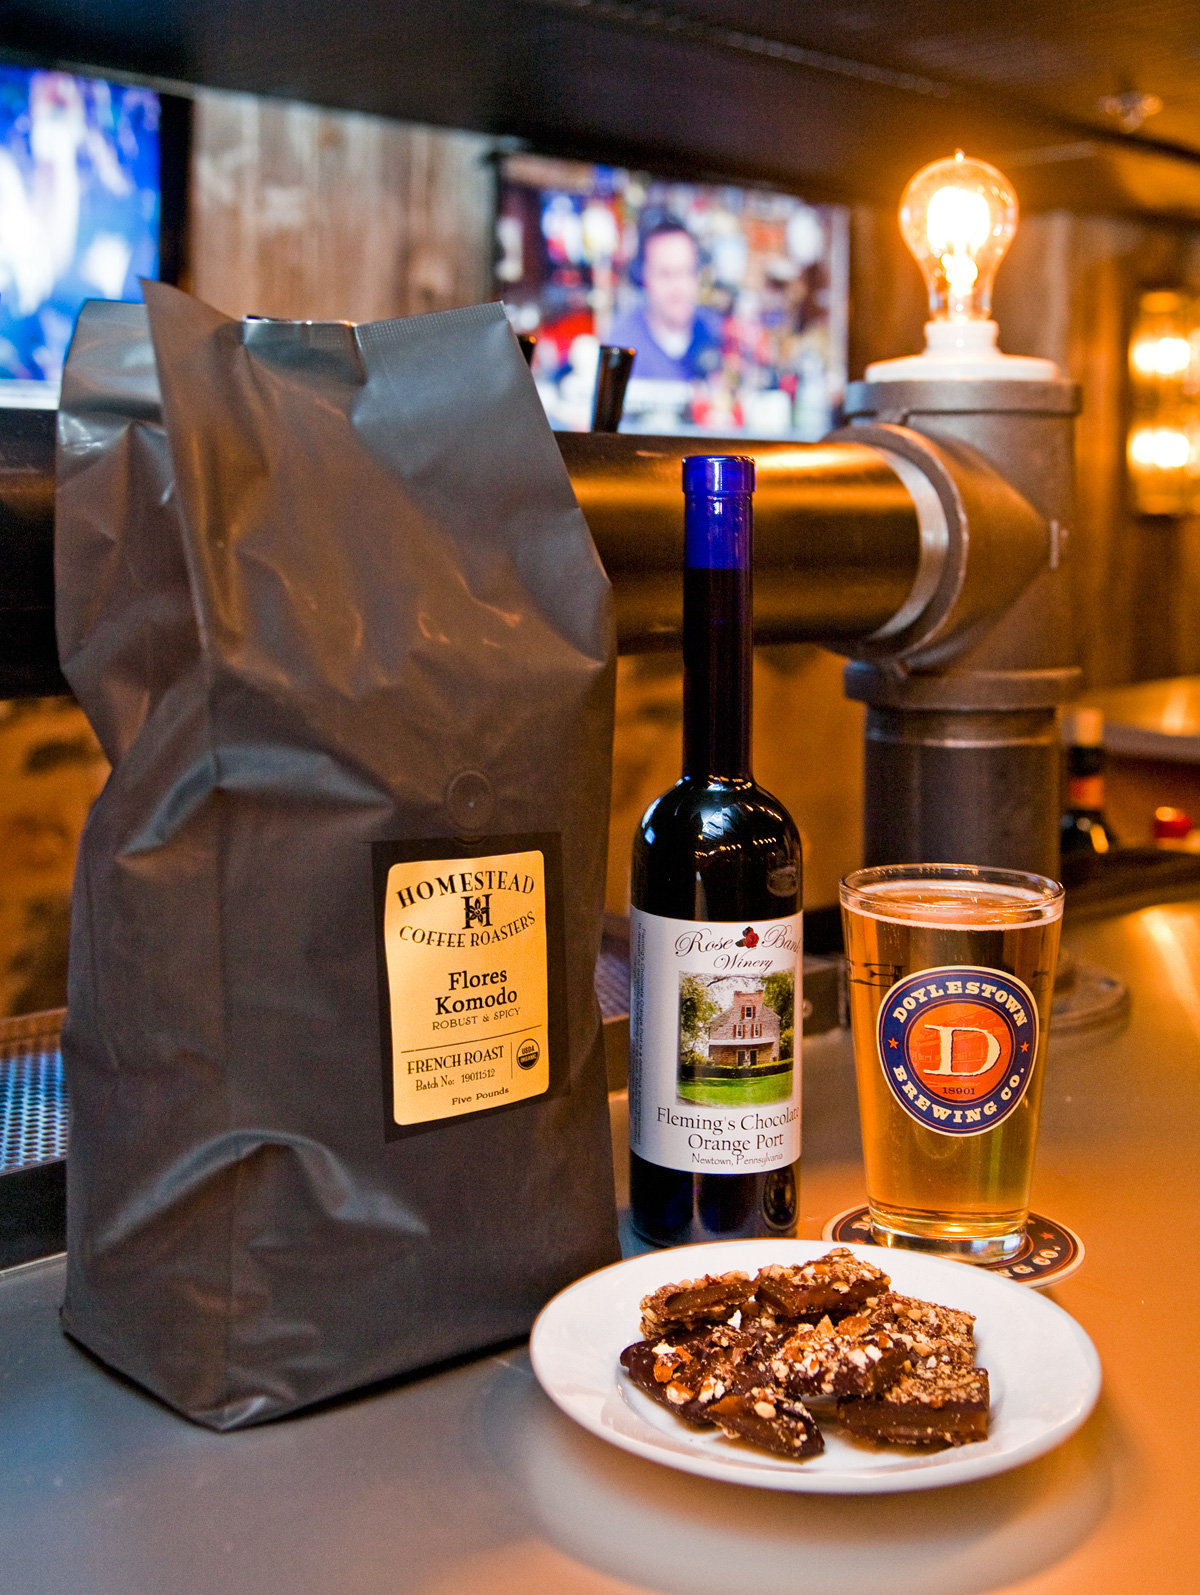 Homestead Coffee Roasters, Rose Bank Winery, Doylestown Brewing Co and Laurie's Chocolates collaborate to create new signature products